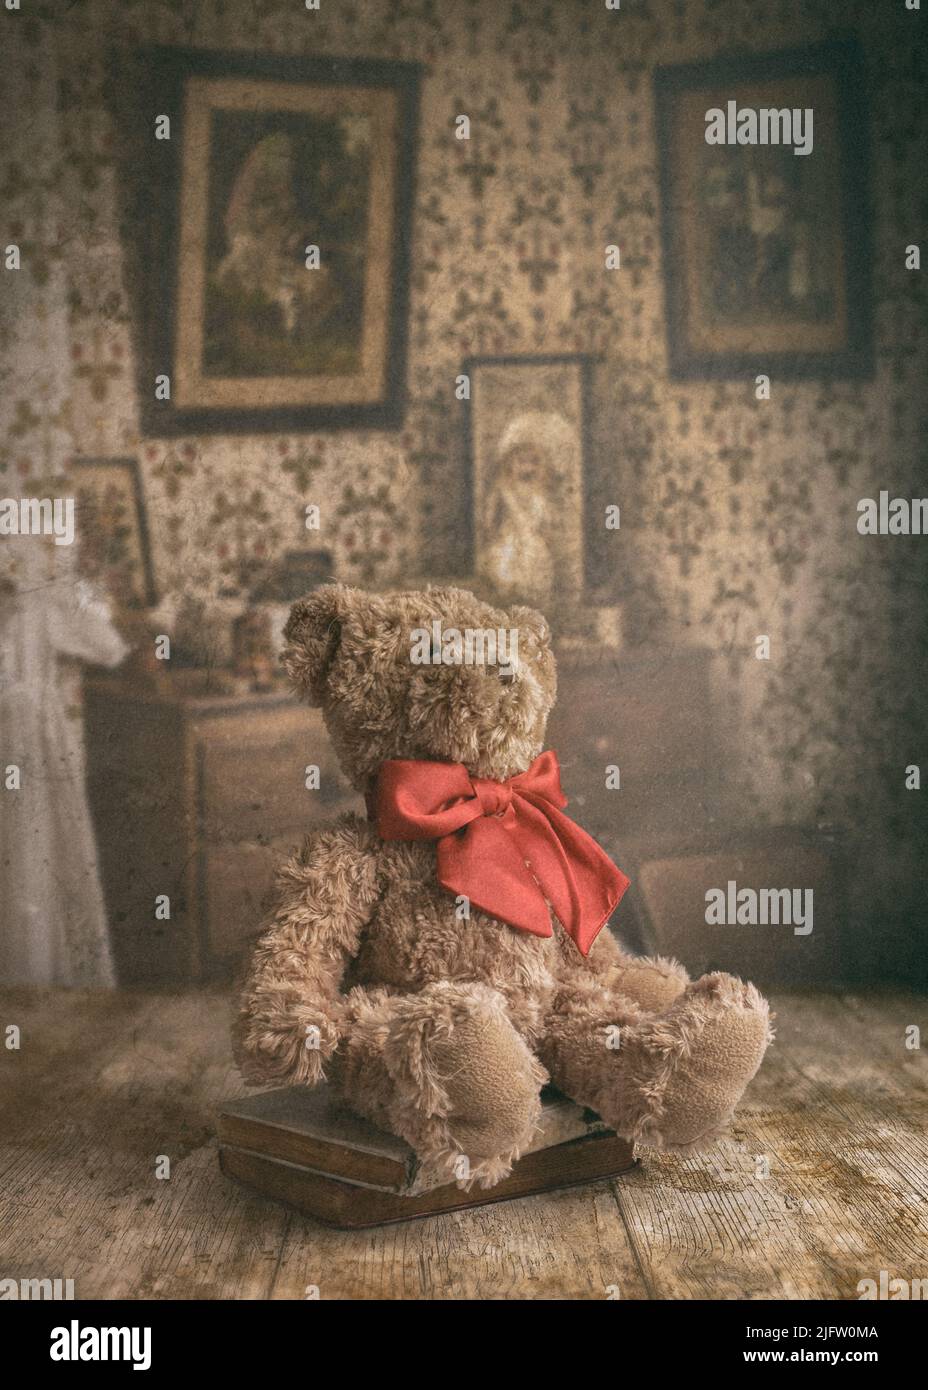 An old, worn child's teddy bear sitting on top of a table in a vintage interior Stock Photo